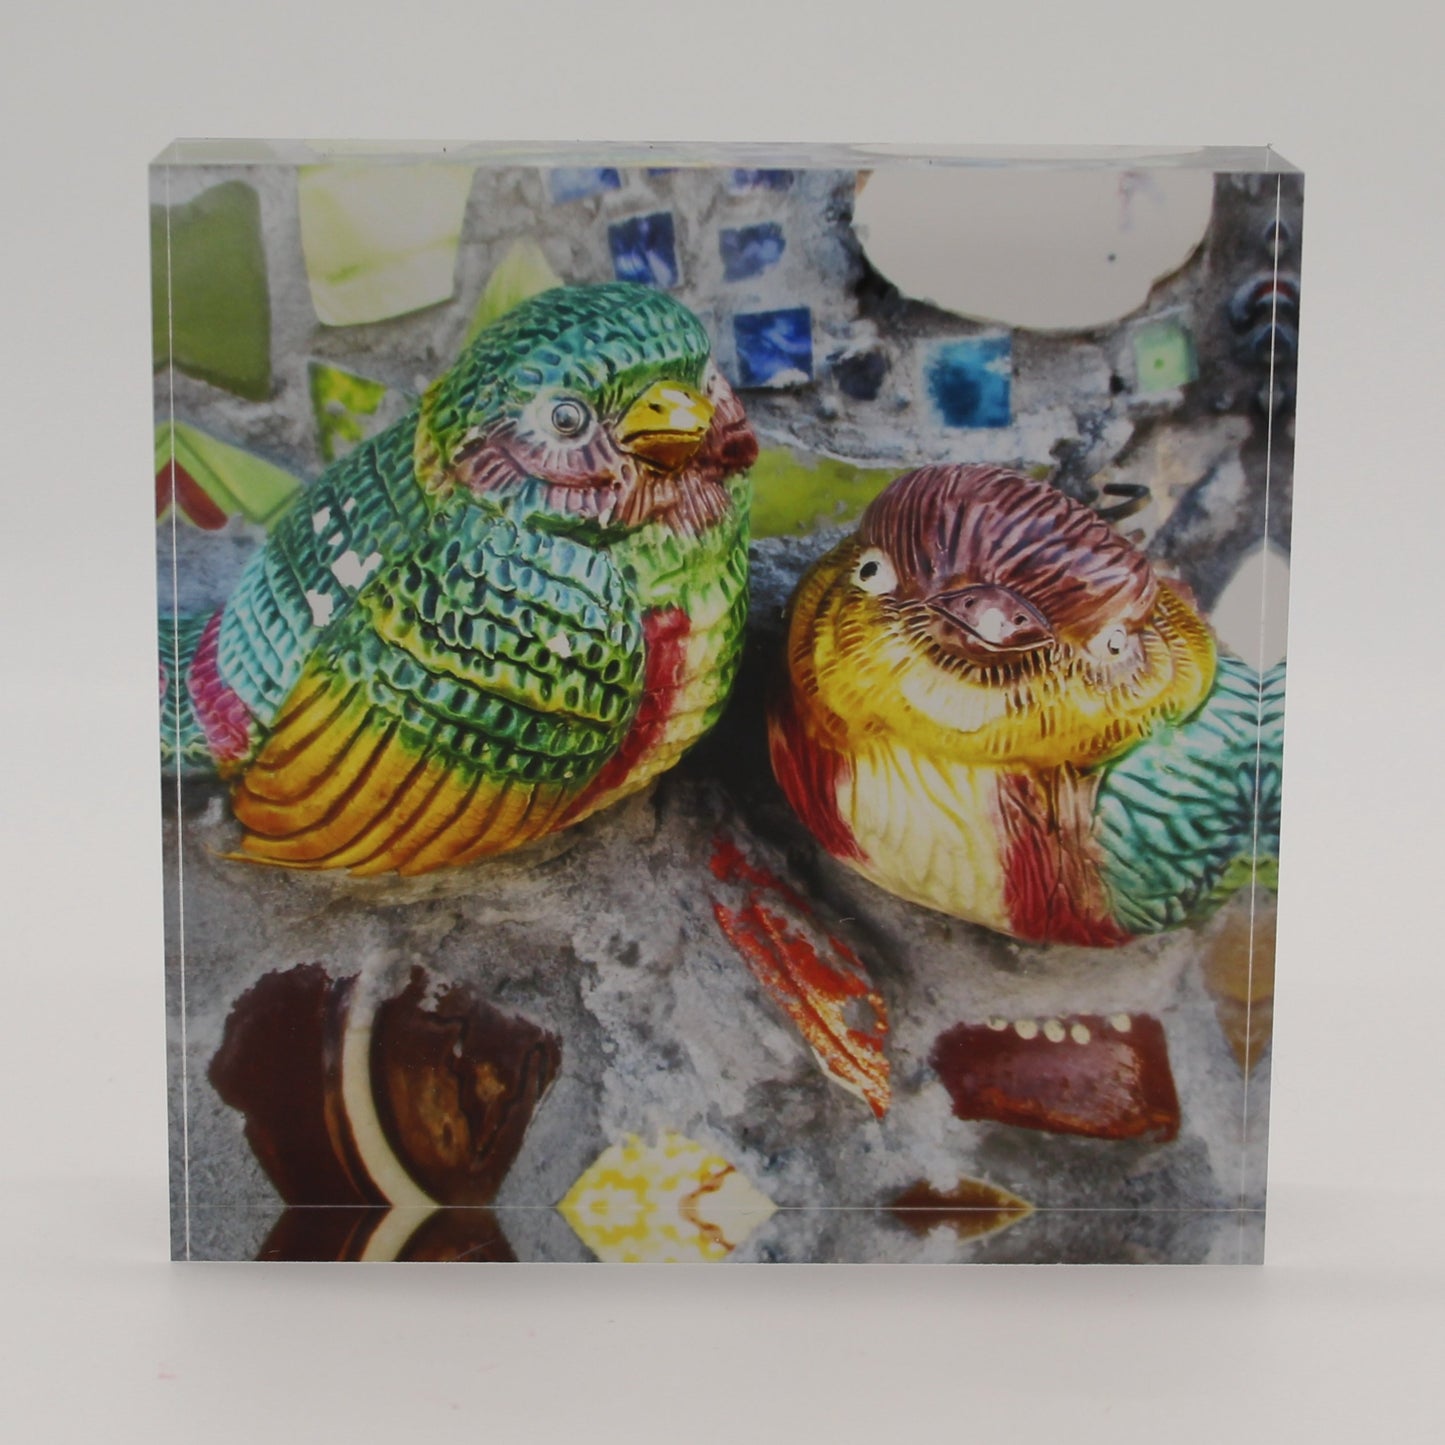 Acrylic block depicting two colorful birds